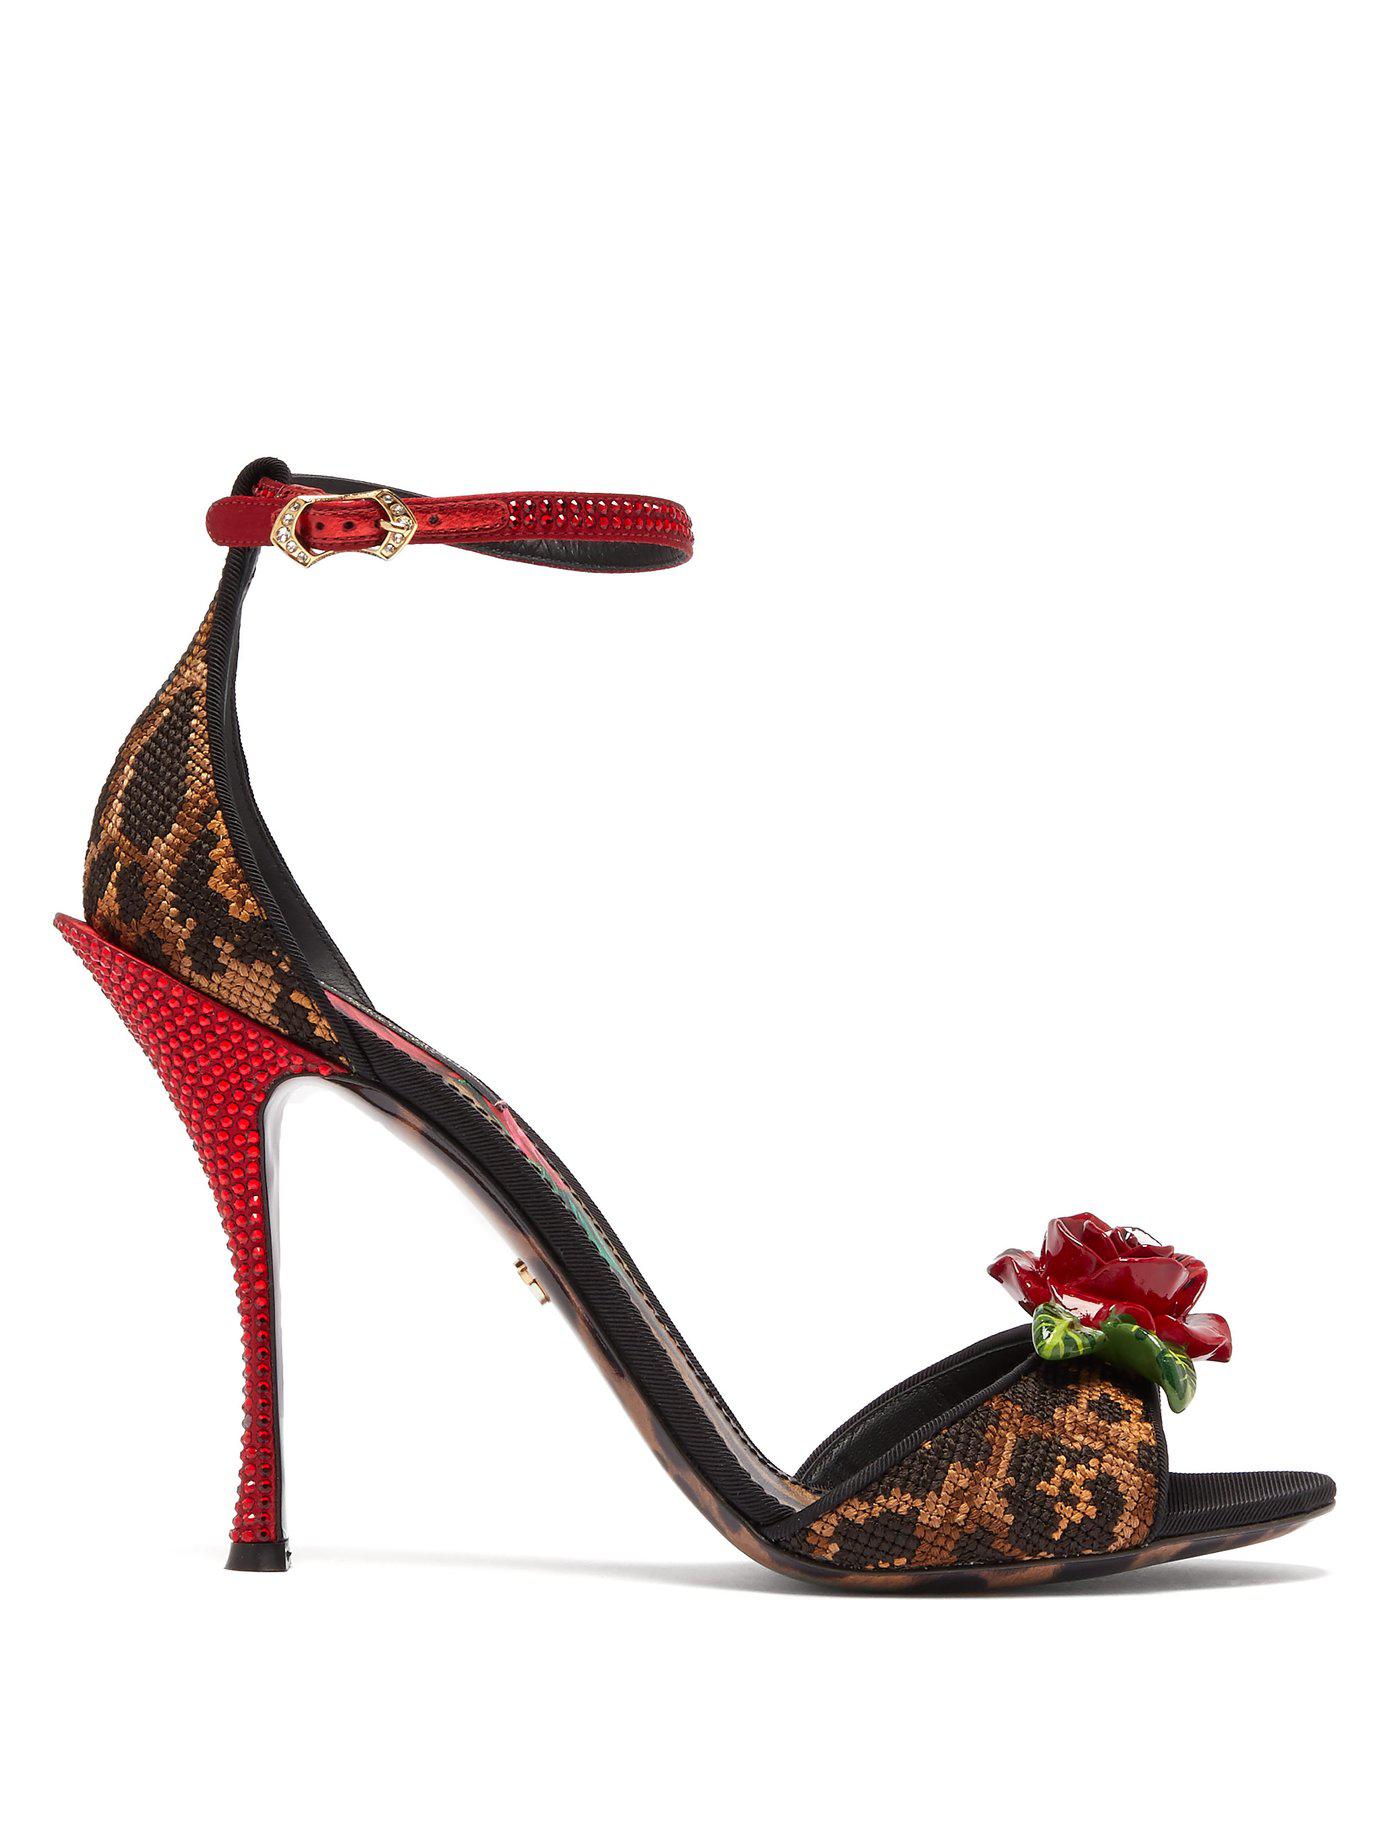 Dolce & Gabbana Sandals In Carpet Stitch With Leopard Embroidery | Lyst  Canada